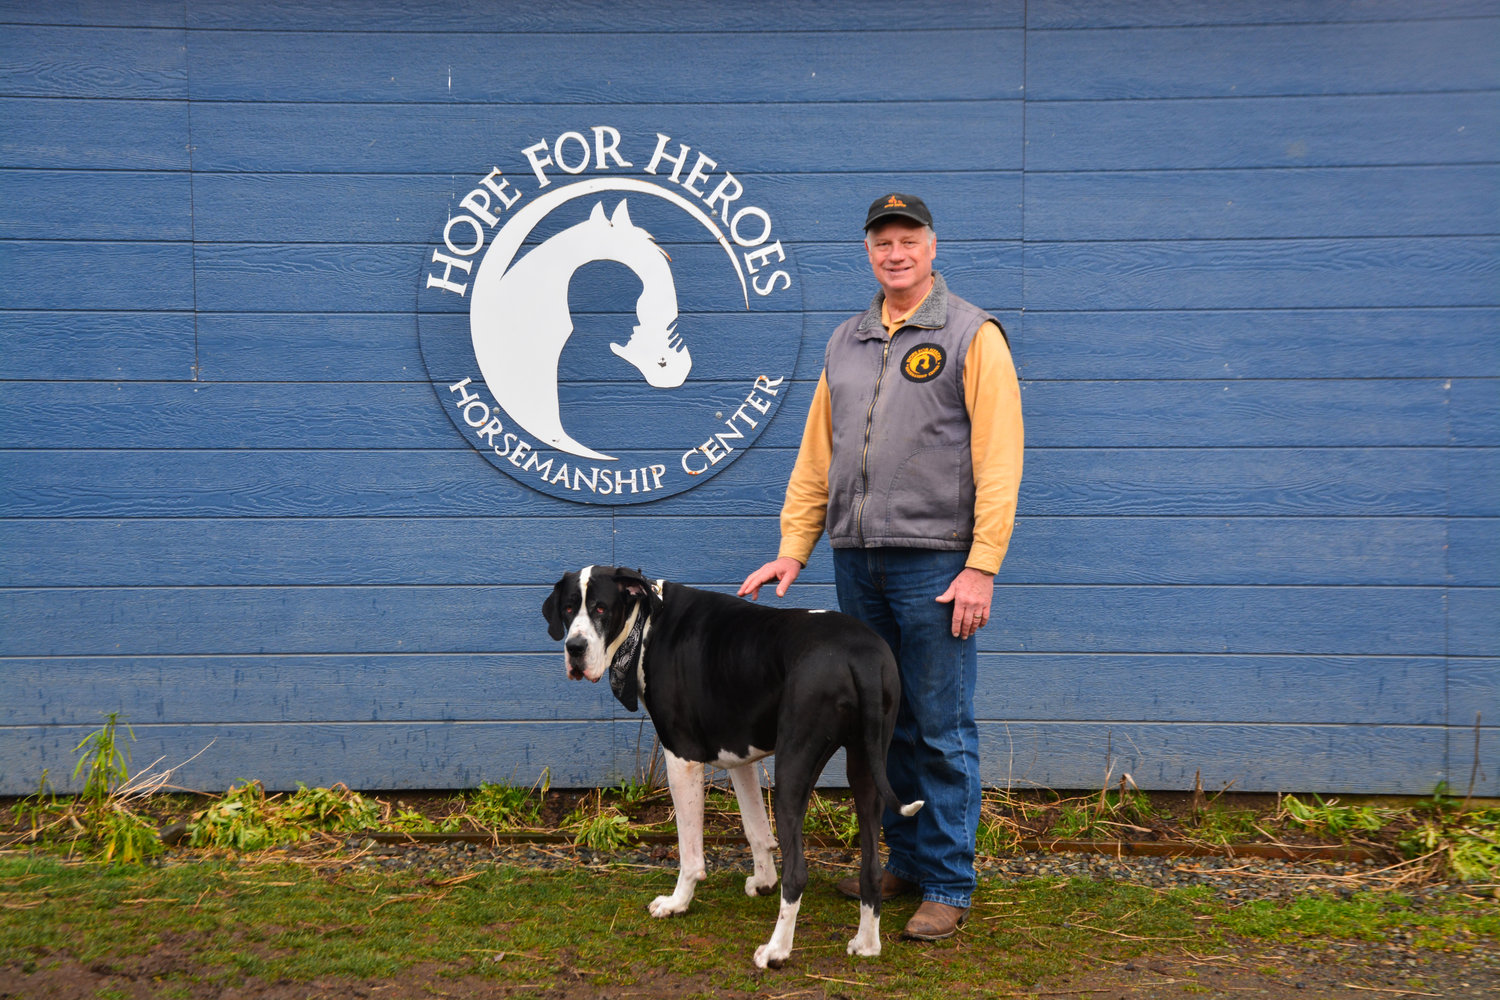 Bob Woelk poses with his dog Junior in front of a Hope for Heroes sign on a tack room in Yelm.